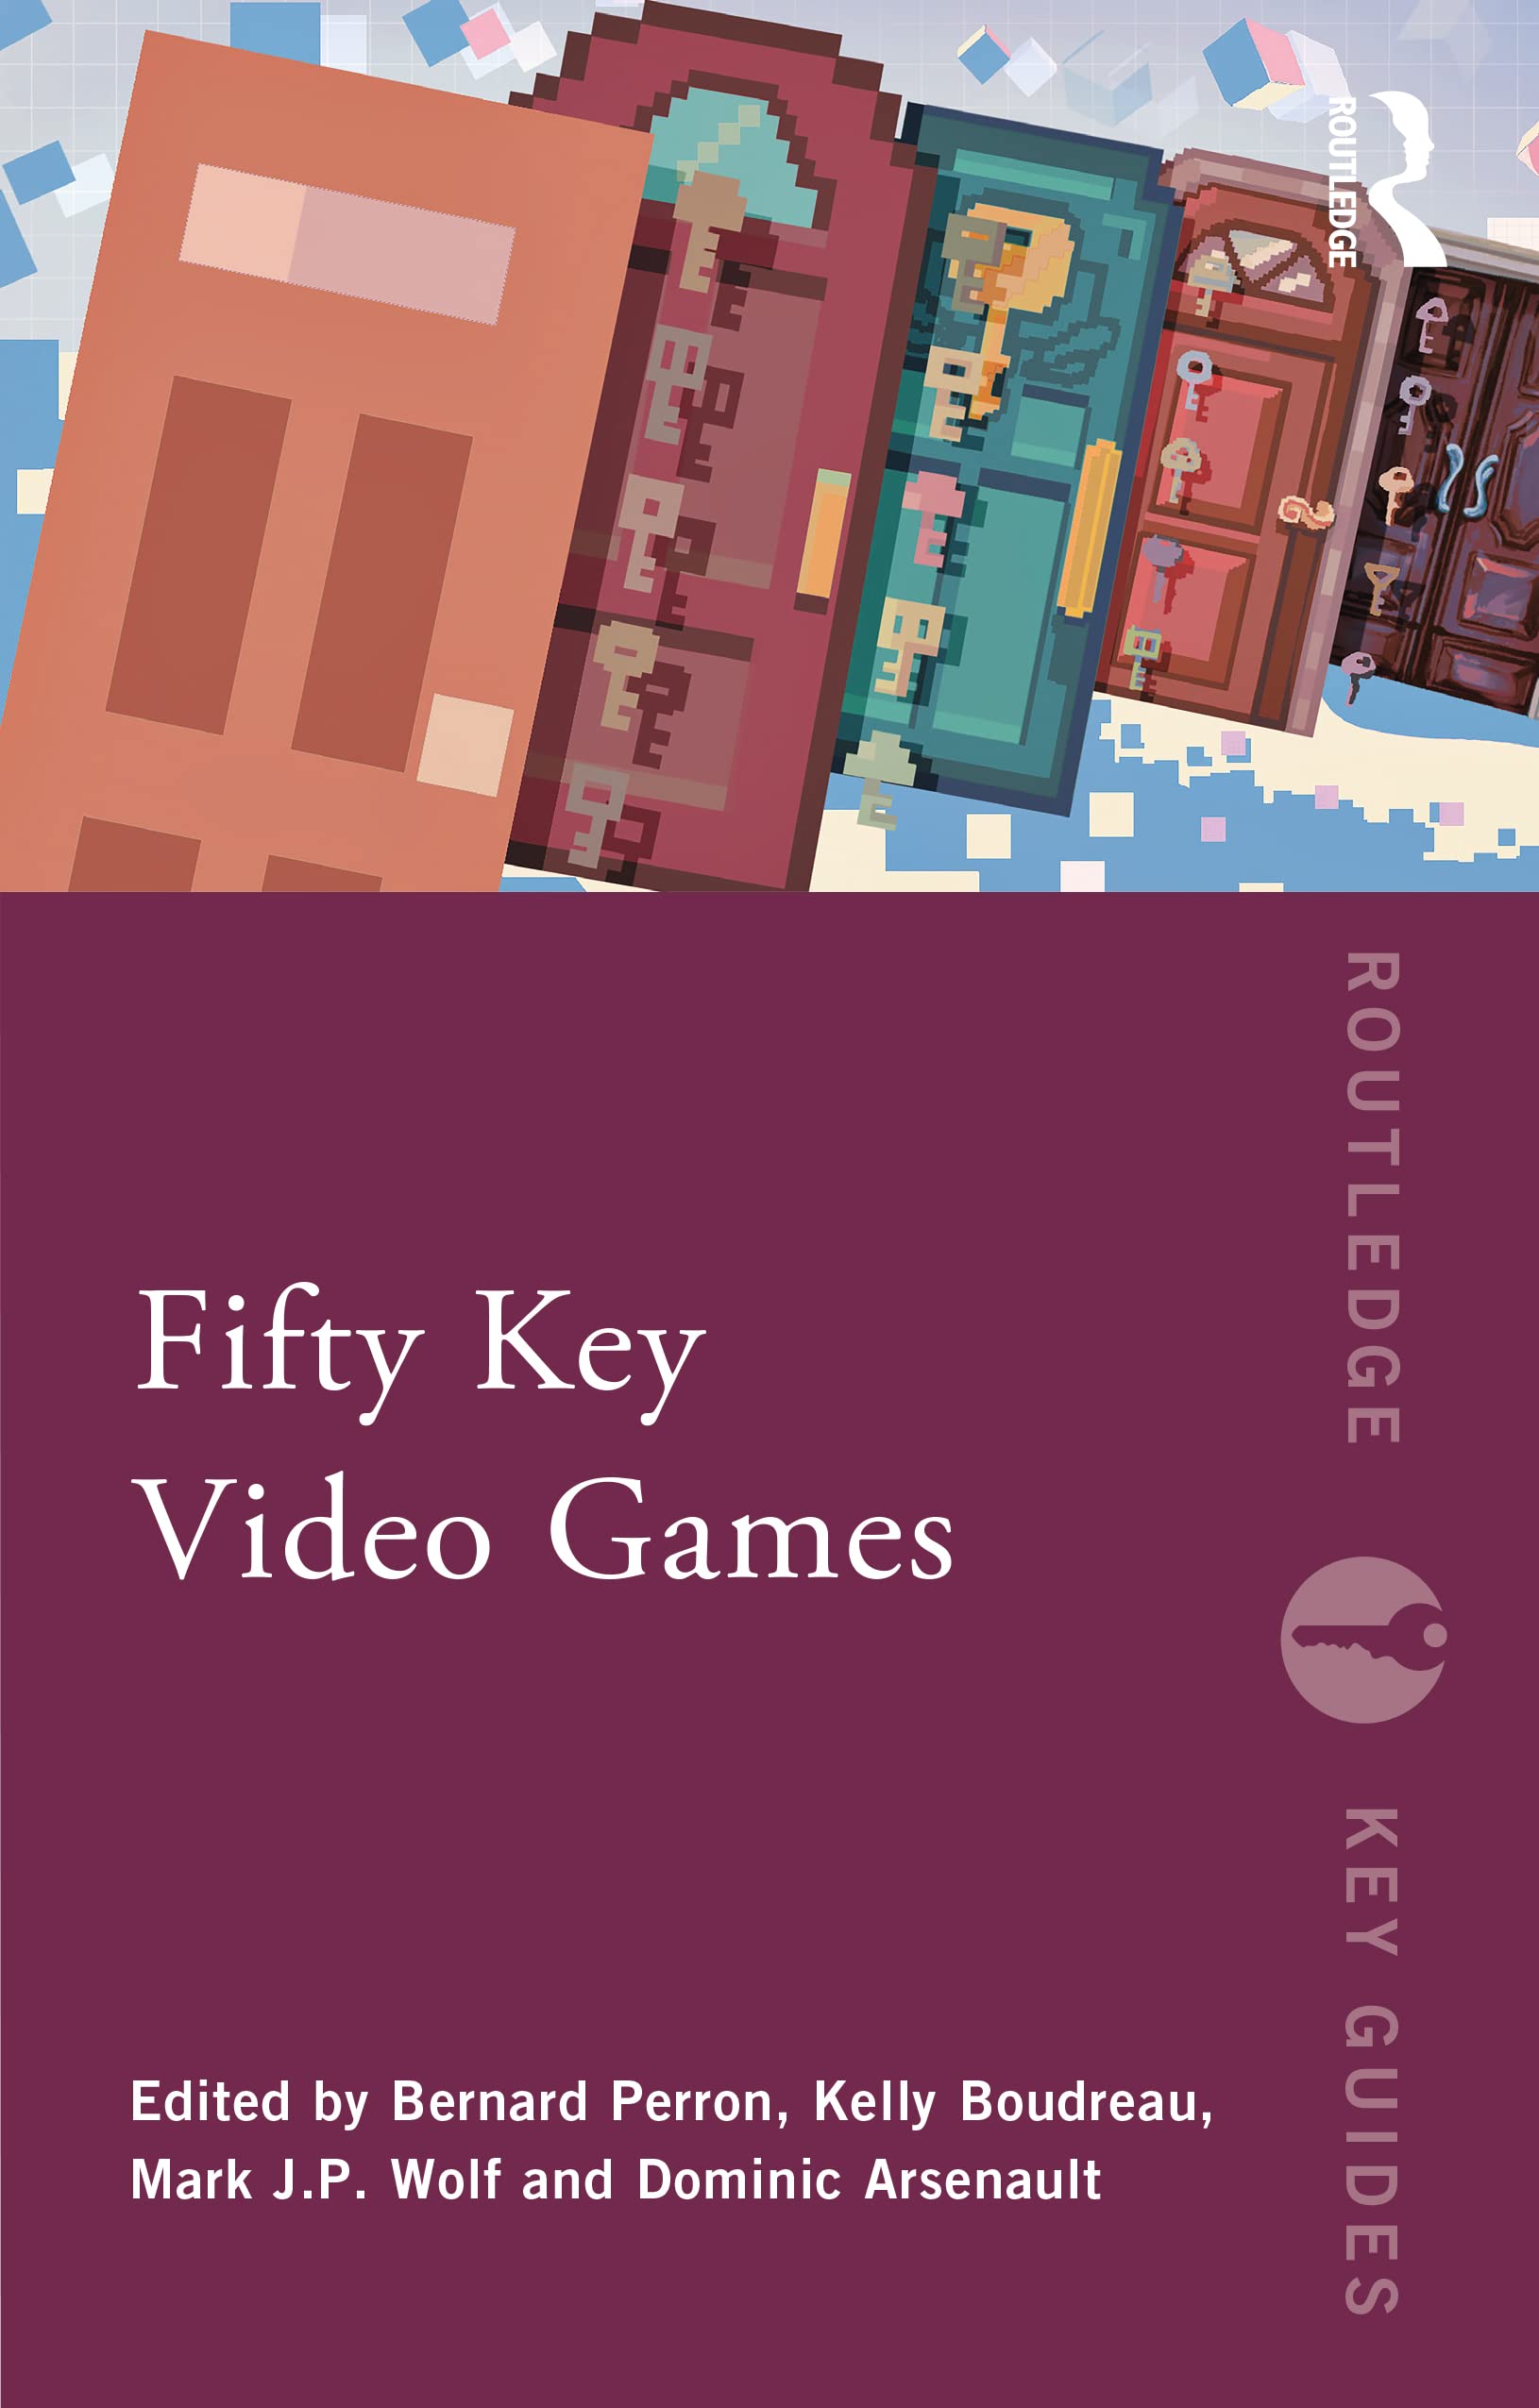 Fifty Key Video Games Game Book Review